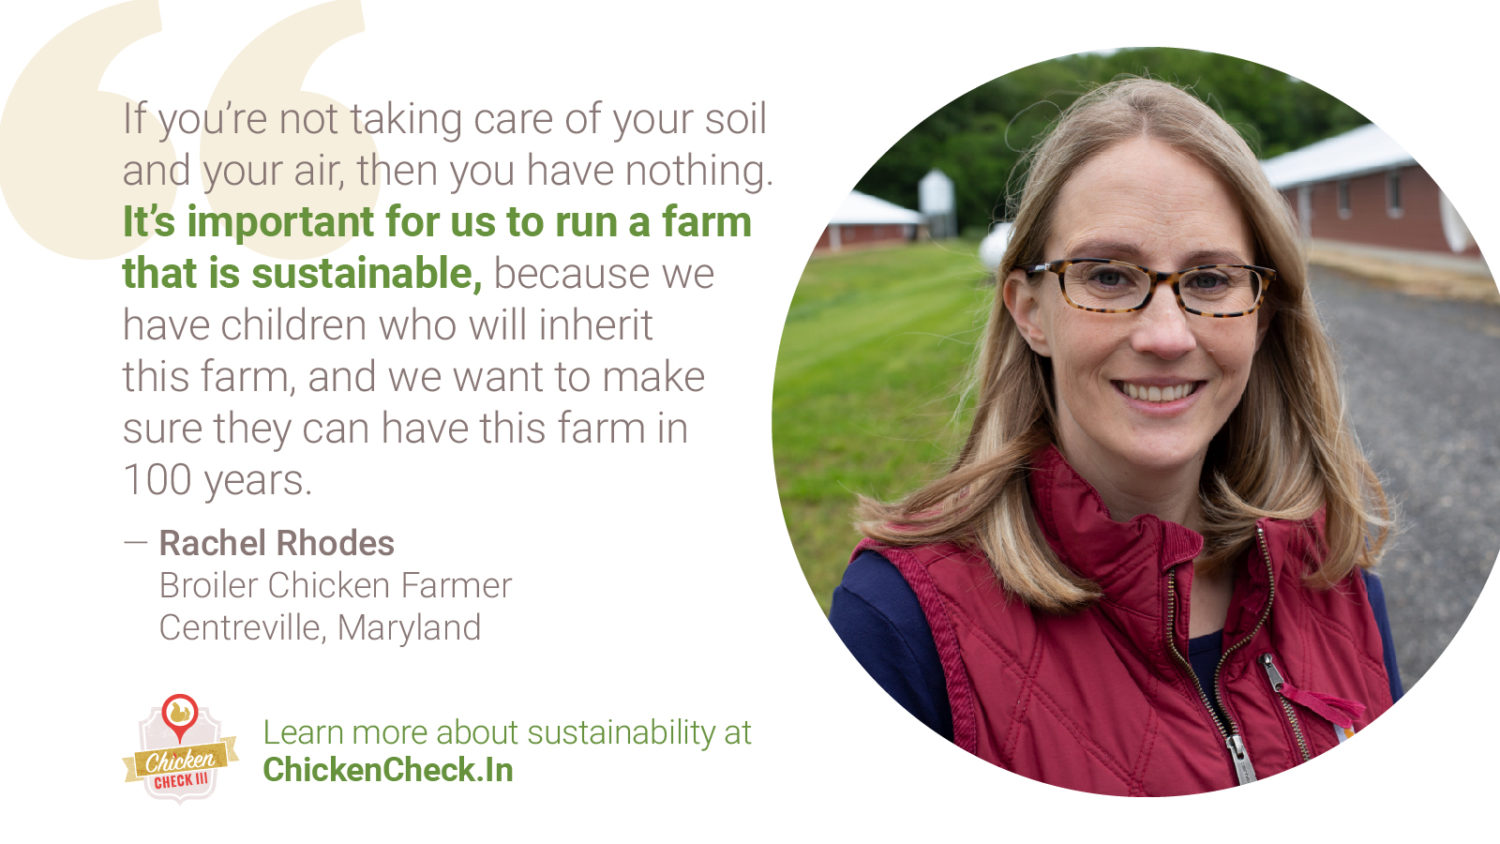 “If you’re not taking care of your soil and your air, then you have nothing. It’s important for us to run a farm that is sustainable because we have children who will inherit this farm, and we want to make sure they can have this farm in 100 years.” - Rachel Rhodes, broiler chicken farmer from Centreville, Maryland